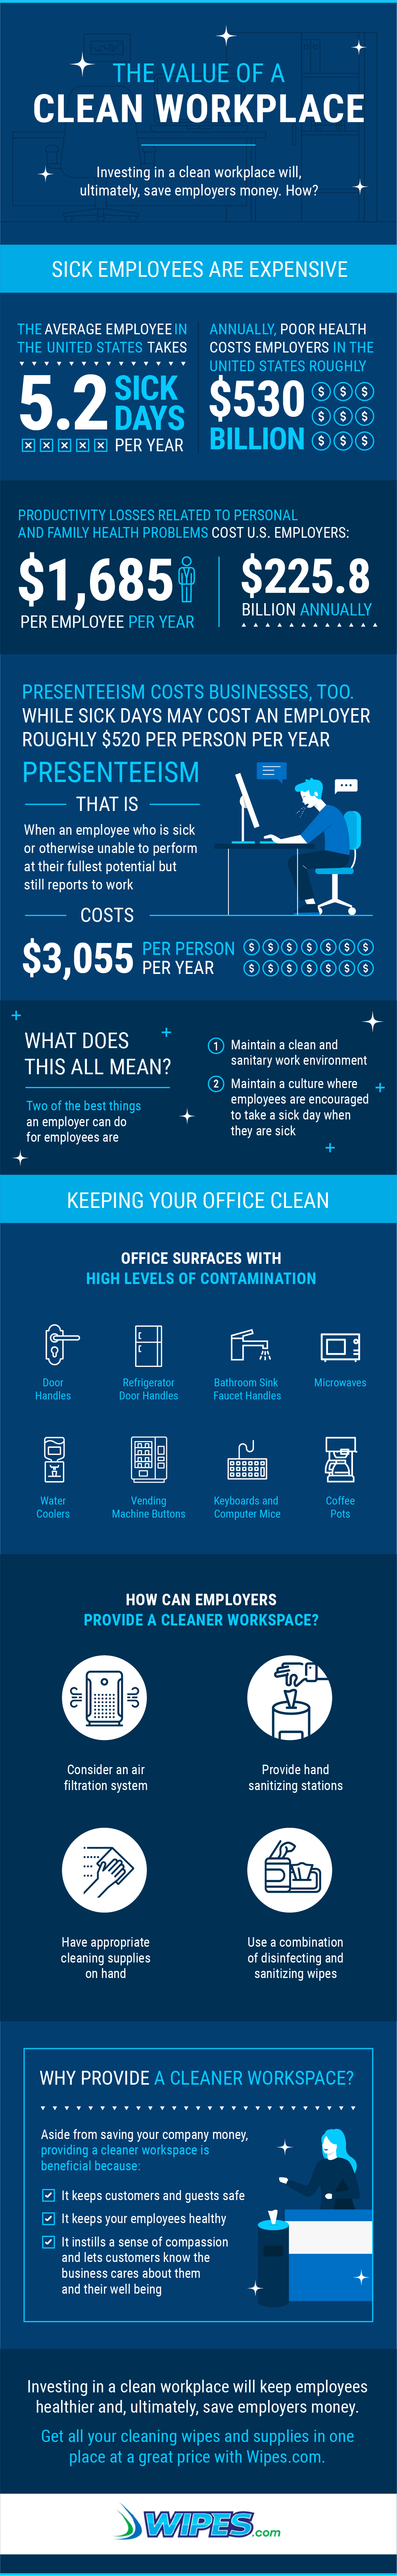 The Value of a Clean Workplace Infographic